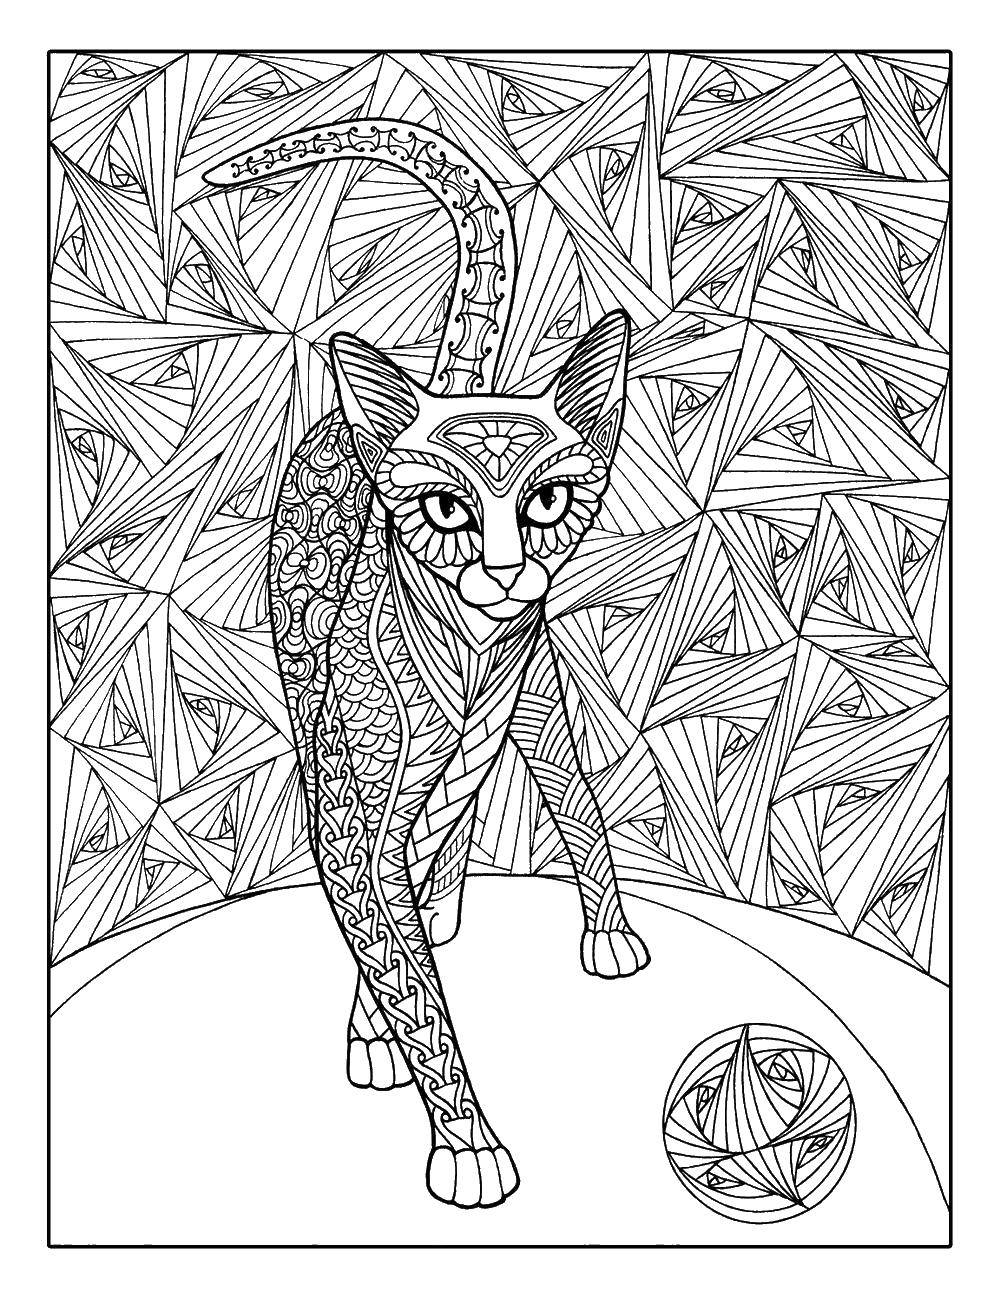 Coloring Cat painted pattern. Category The cat. Tags:  the cat, patterns.